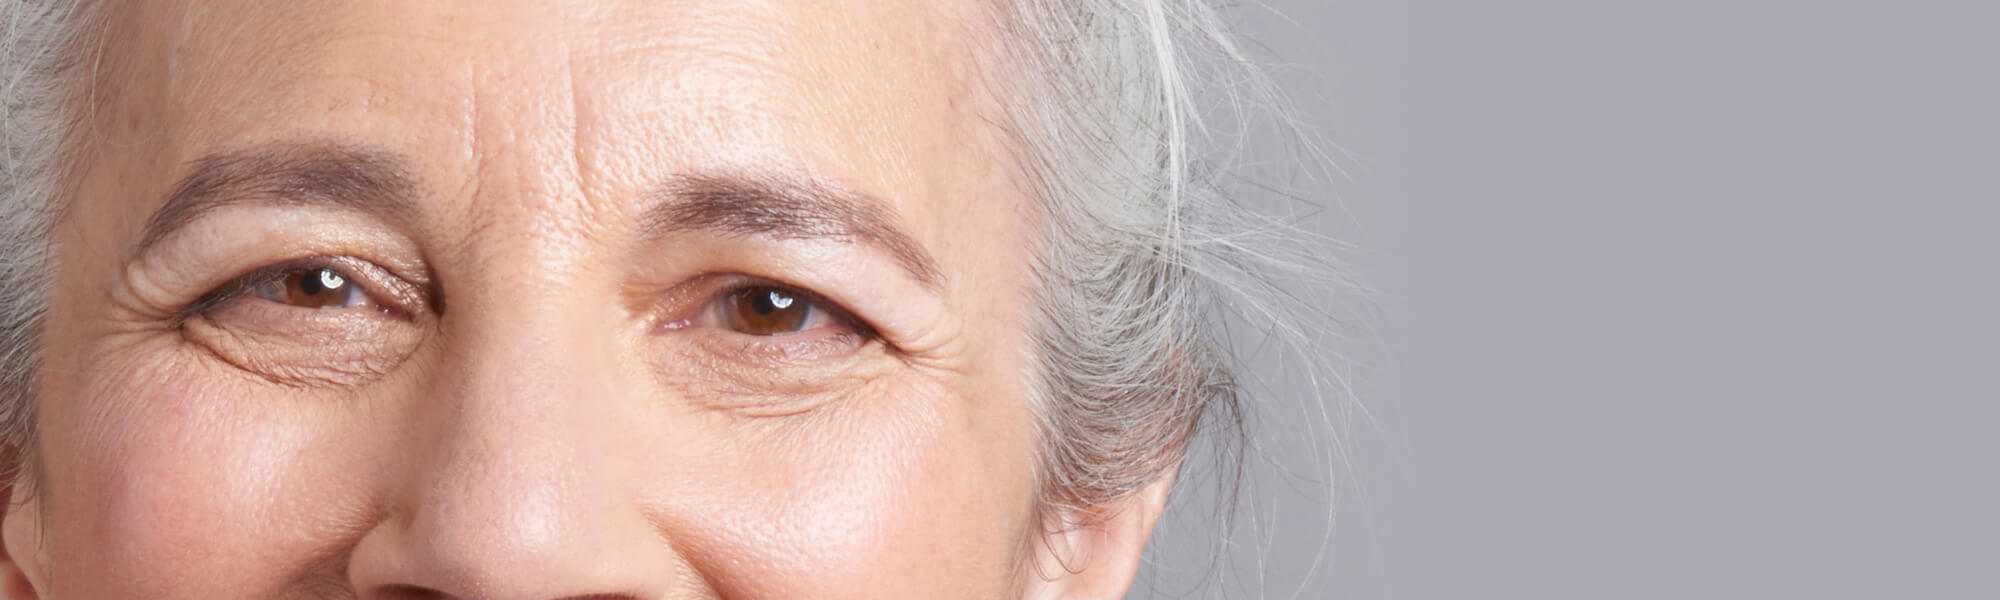 National Grandparents Day   Beauty Tips For Keeping Our Youthful Looks